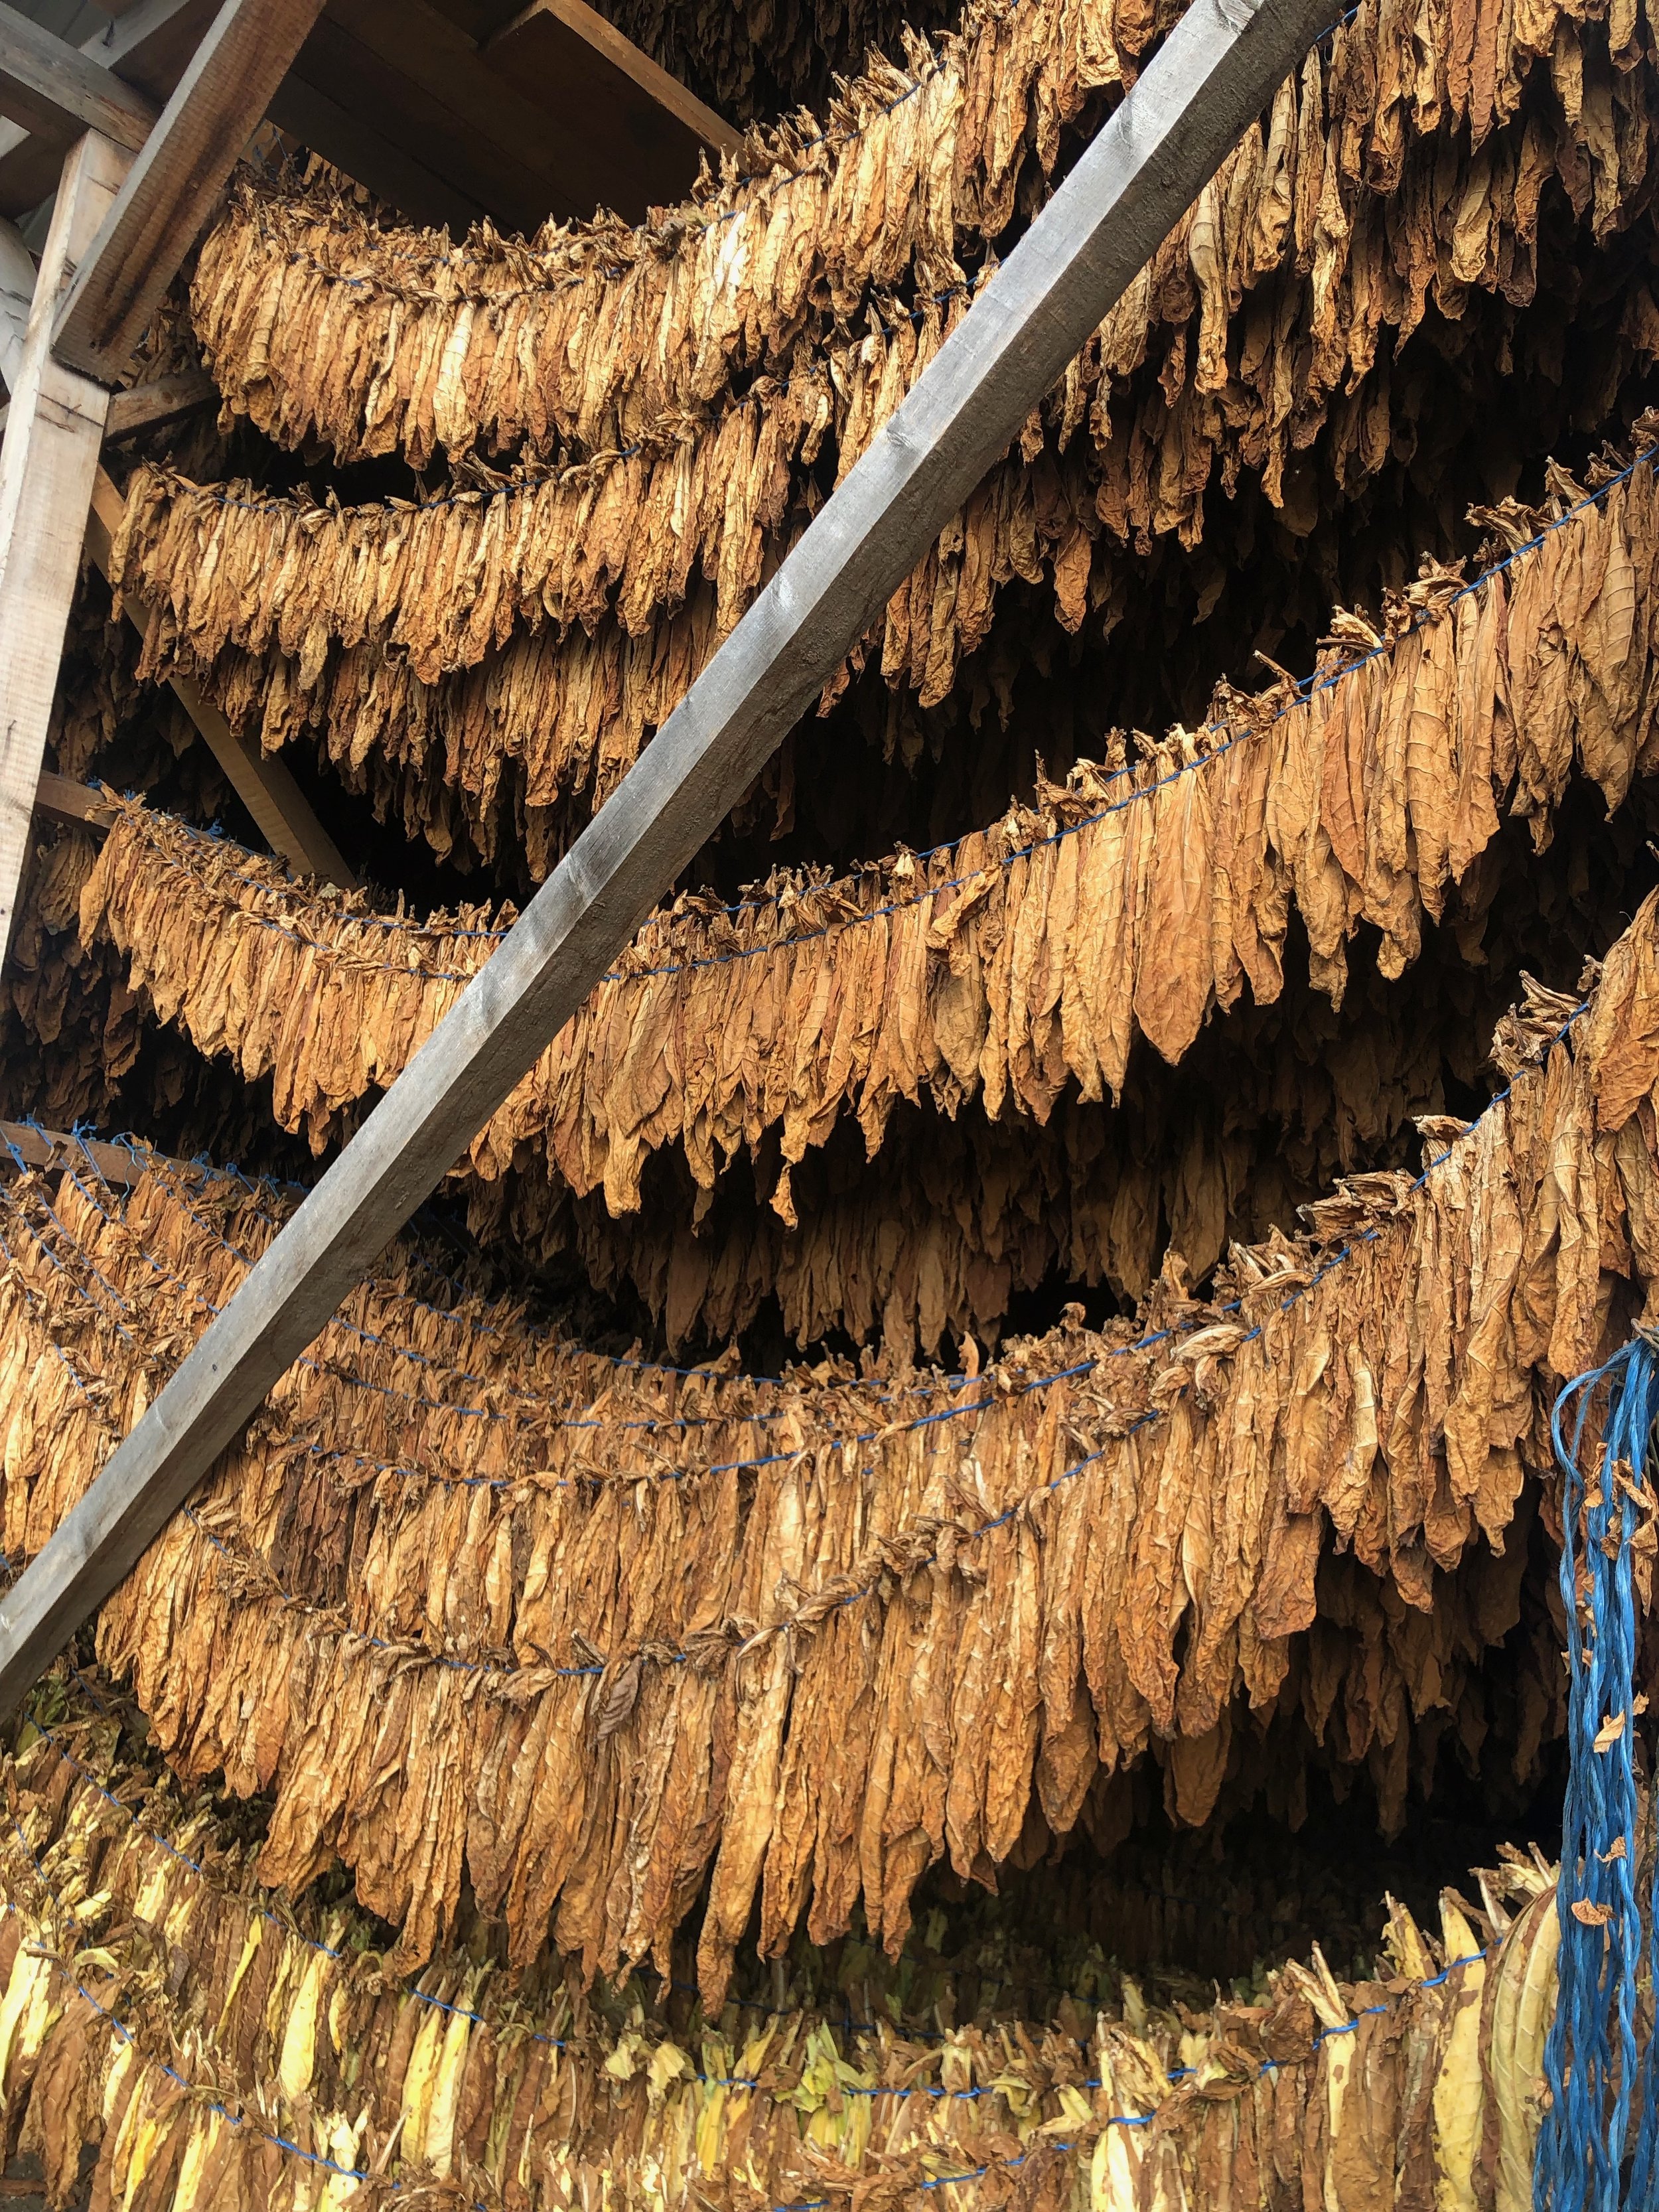 Tobacco leaves drying in a village near Budești